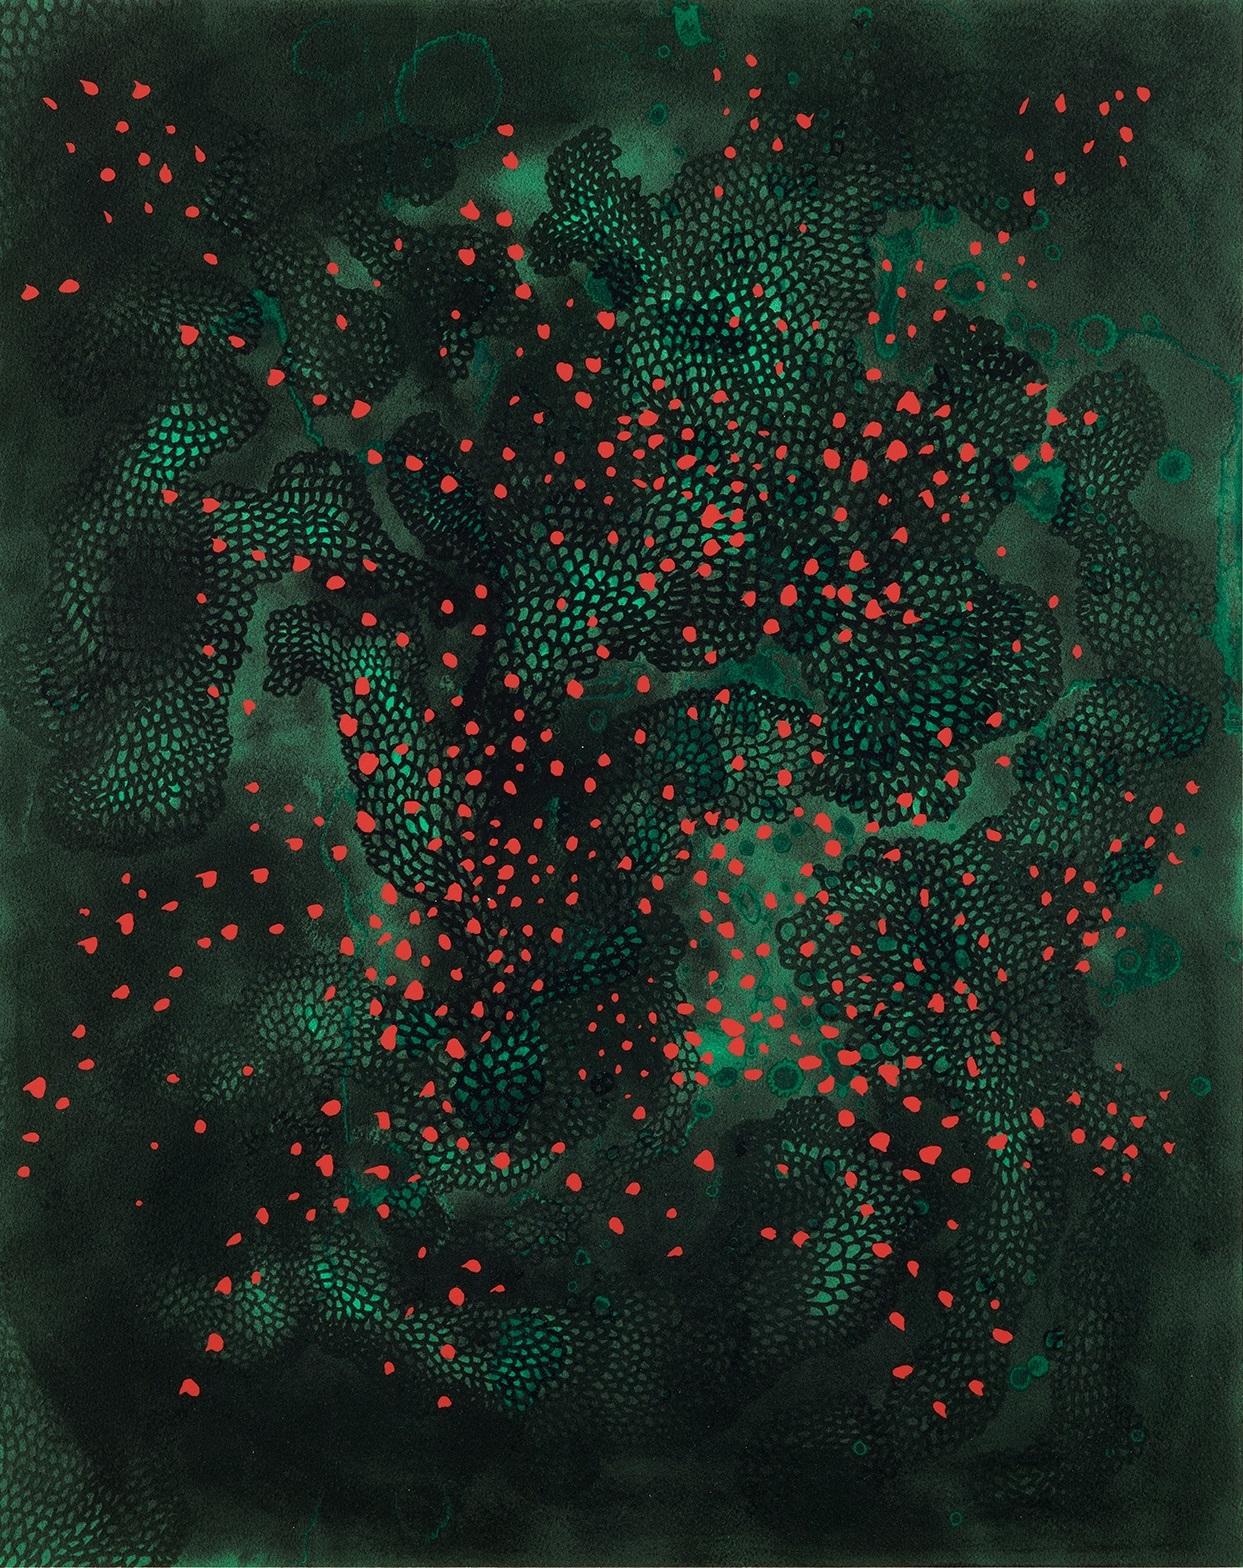 Yayoi Kusama 
Fireflies (1999). Edition 74/100
Screenprint
[14 screens, 14 colors, 14 runs]
59.7 x 47.7 cm [23 ¹/₂ x 18 ²⁵/₃₂ in]  (image) 
76.3 x 56.8 cm [30 ³/₆₄ x 22 ²³/₆₄ in] (sheet)
Edition of 100 + 10 Artist Proofs + 5 Printer Proofs
Published